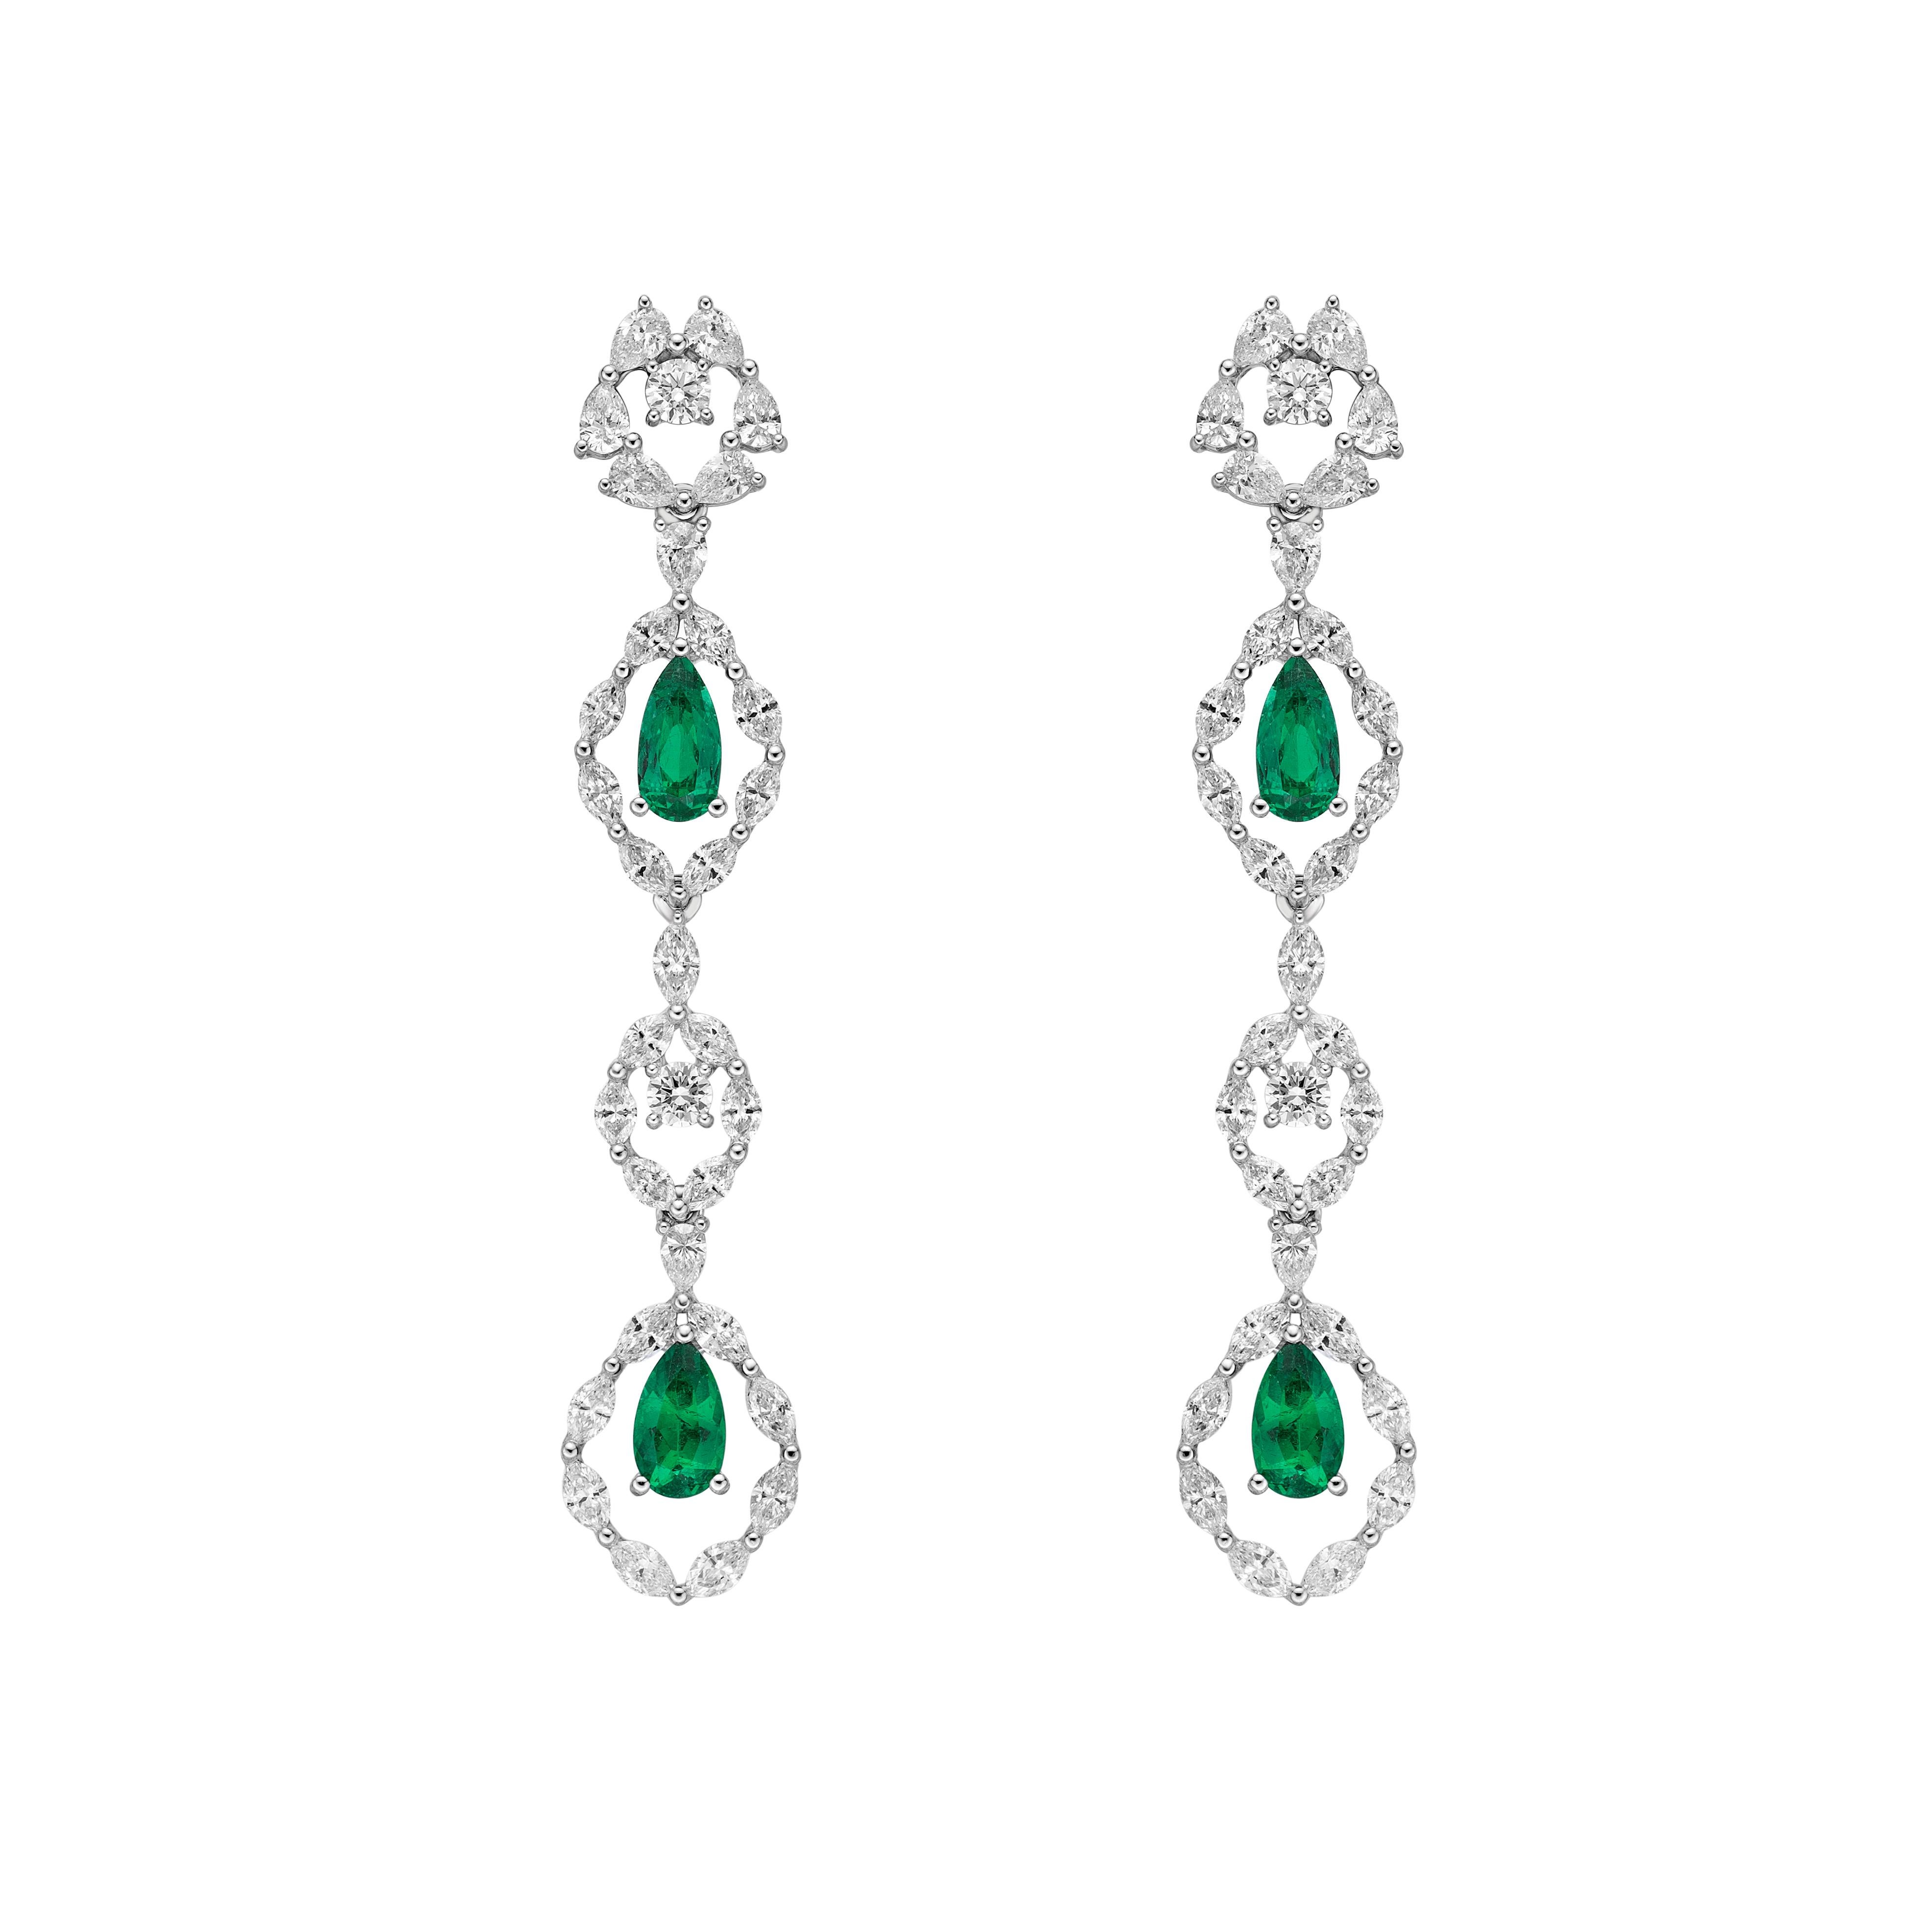 Contemporary 2.3 Carat Colombian Emerald and Diamond Earrings in 18 Karat White Gold For Sale